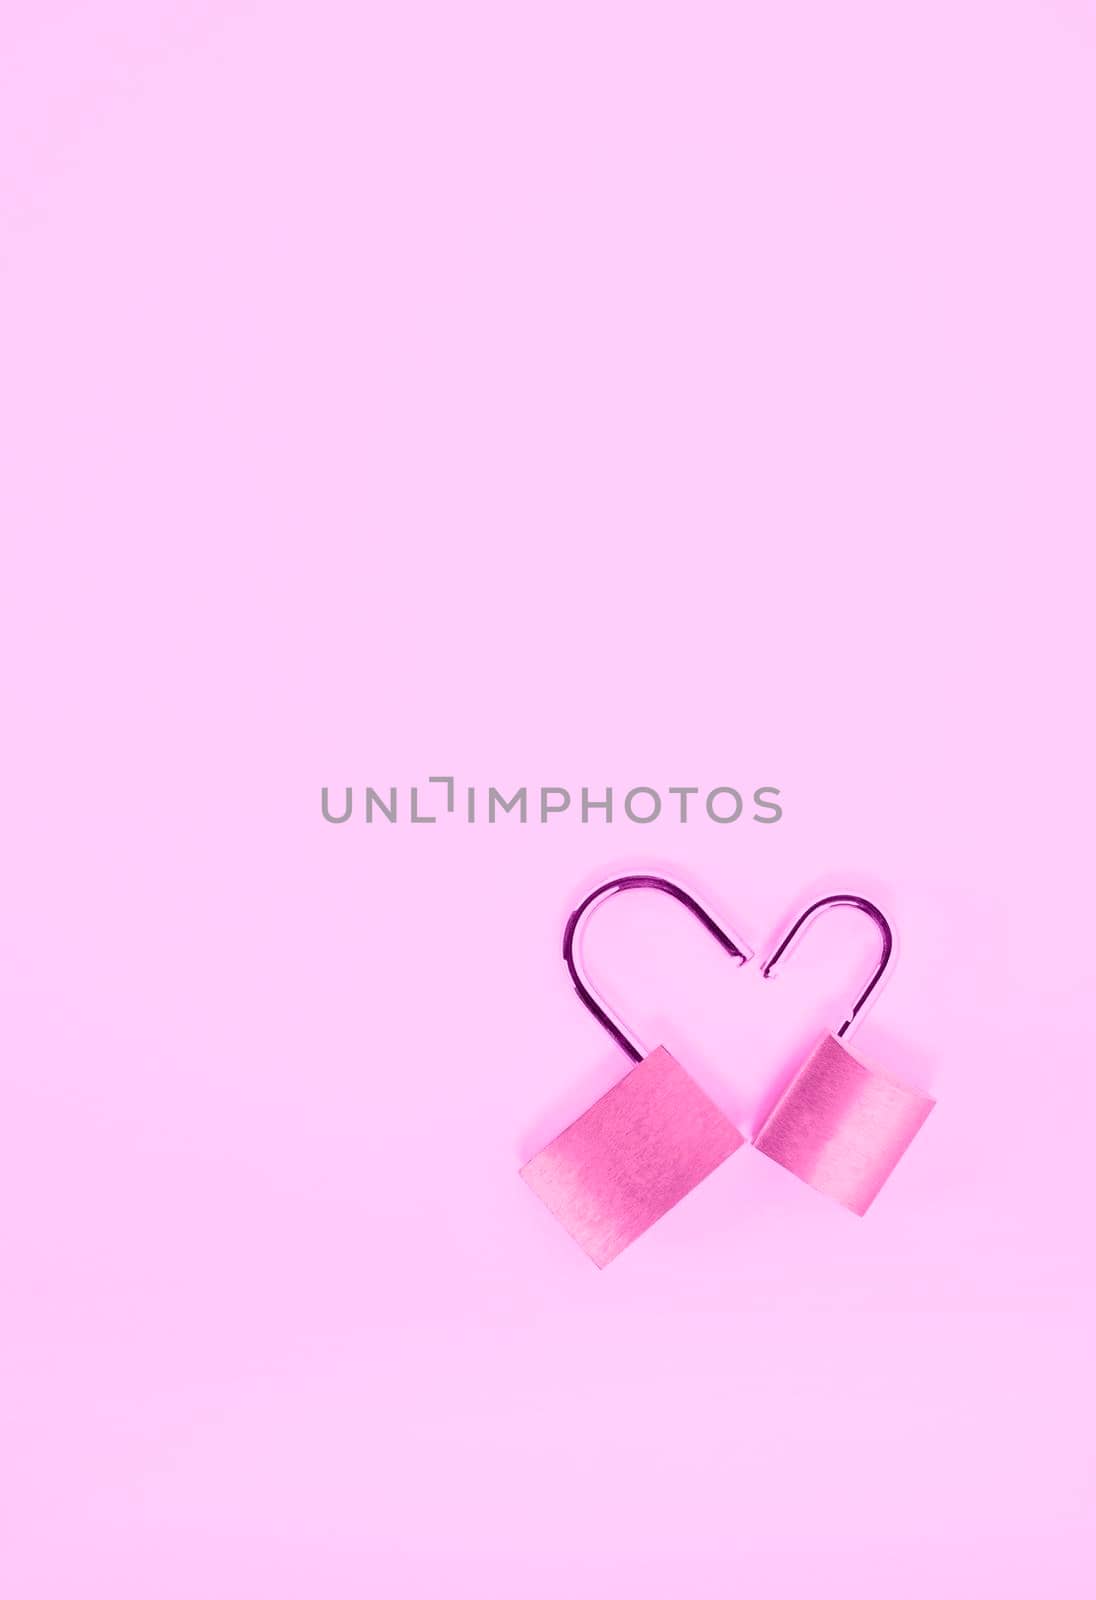 Two opened padlock in heart shape on pink background , passion and love